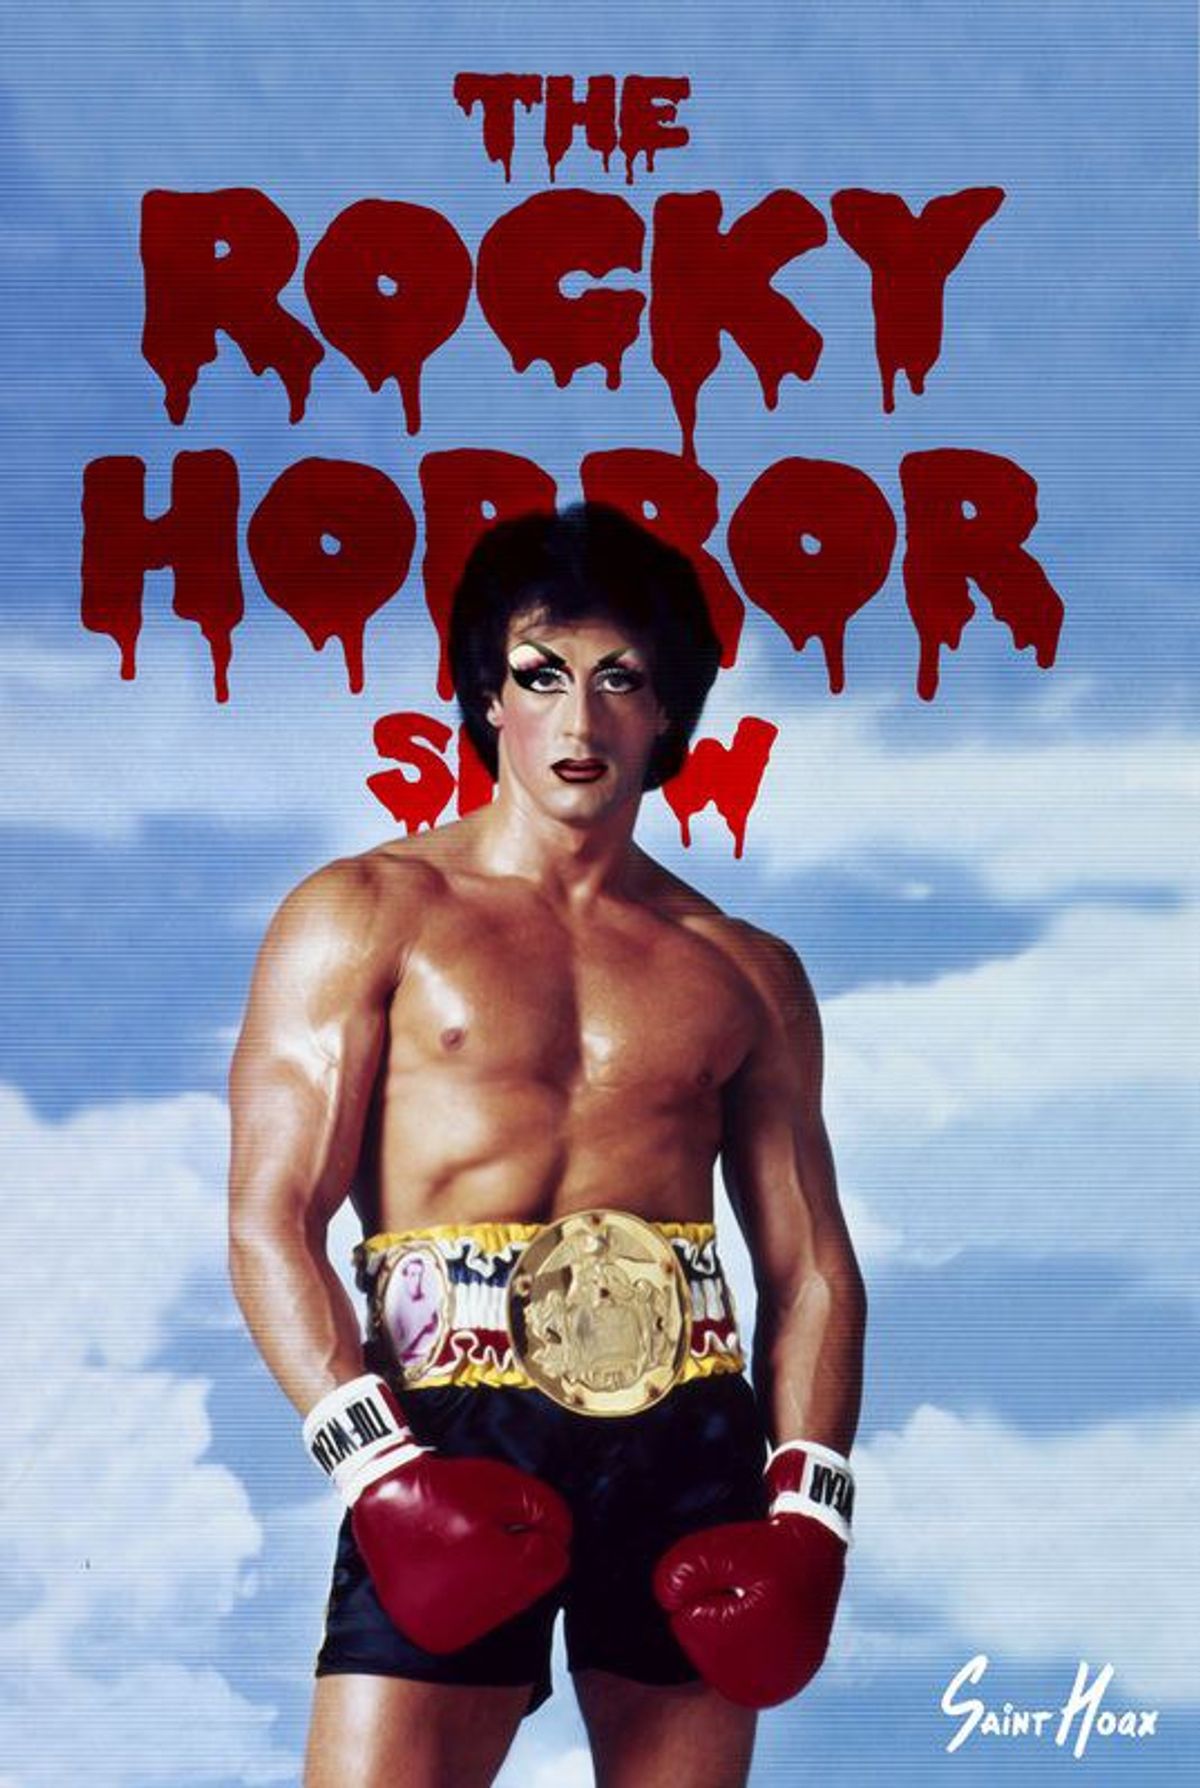 The Few Parallels Between 'Rocky' and 'The Rocky Horror Picture Show'